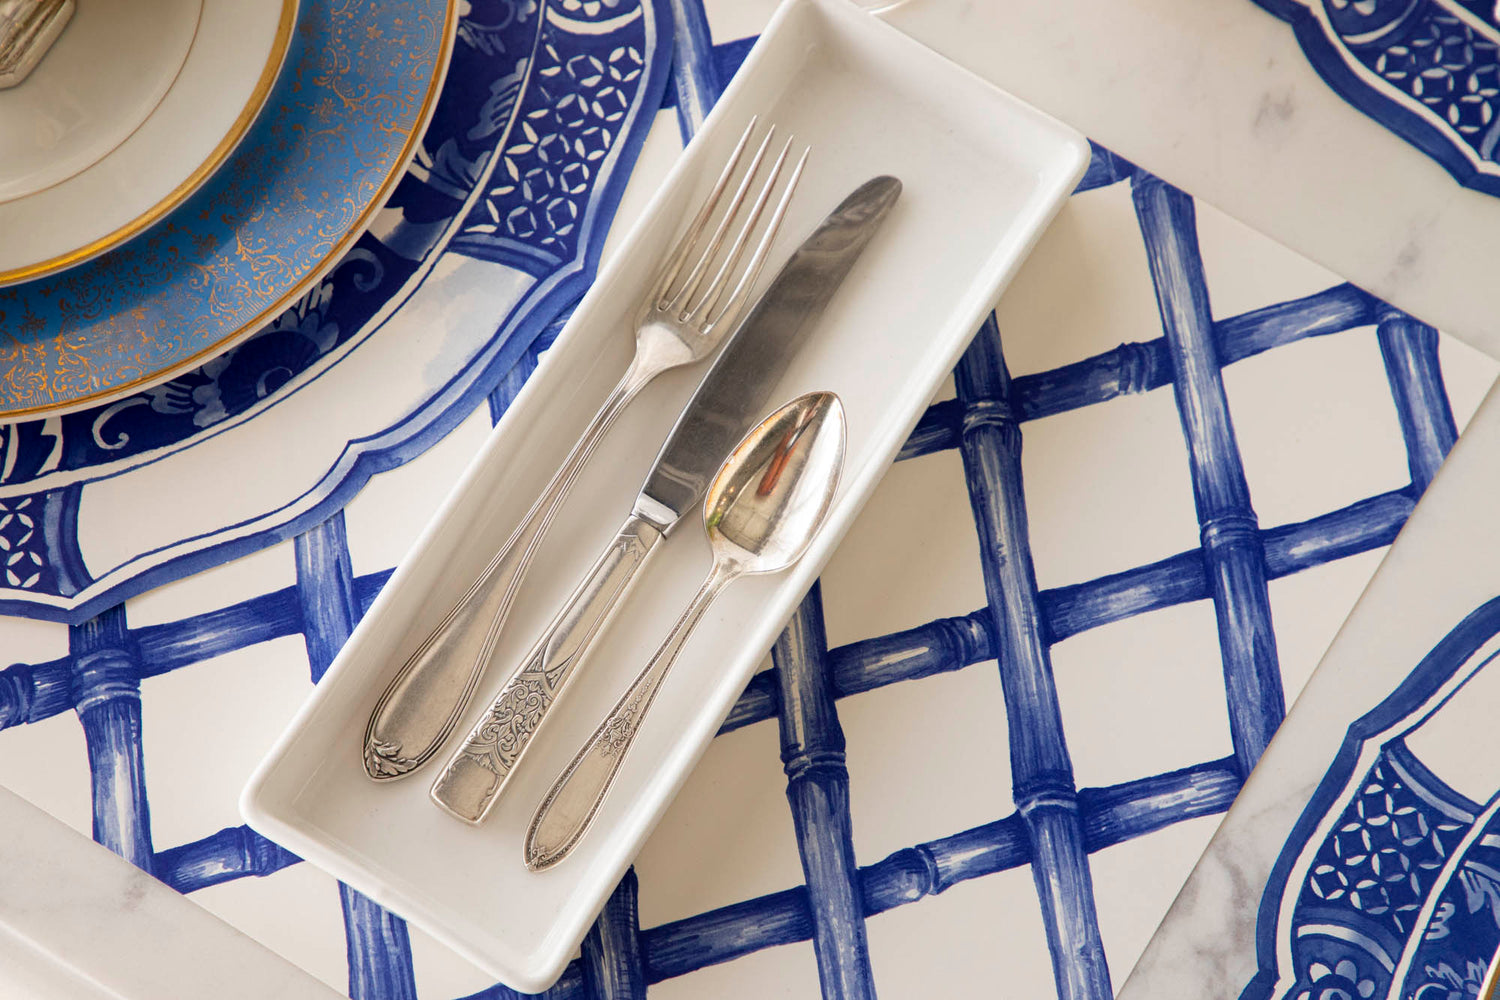 A blue and white table setting with silverware on the Blue Lattice Placemat.